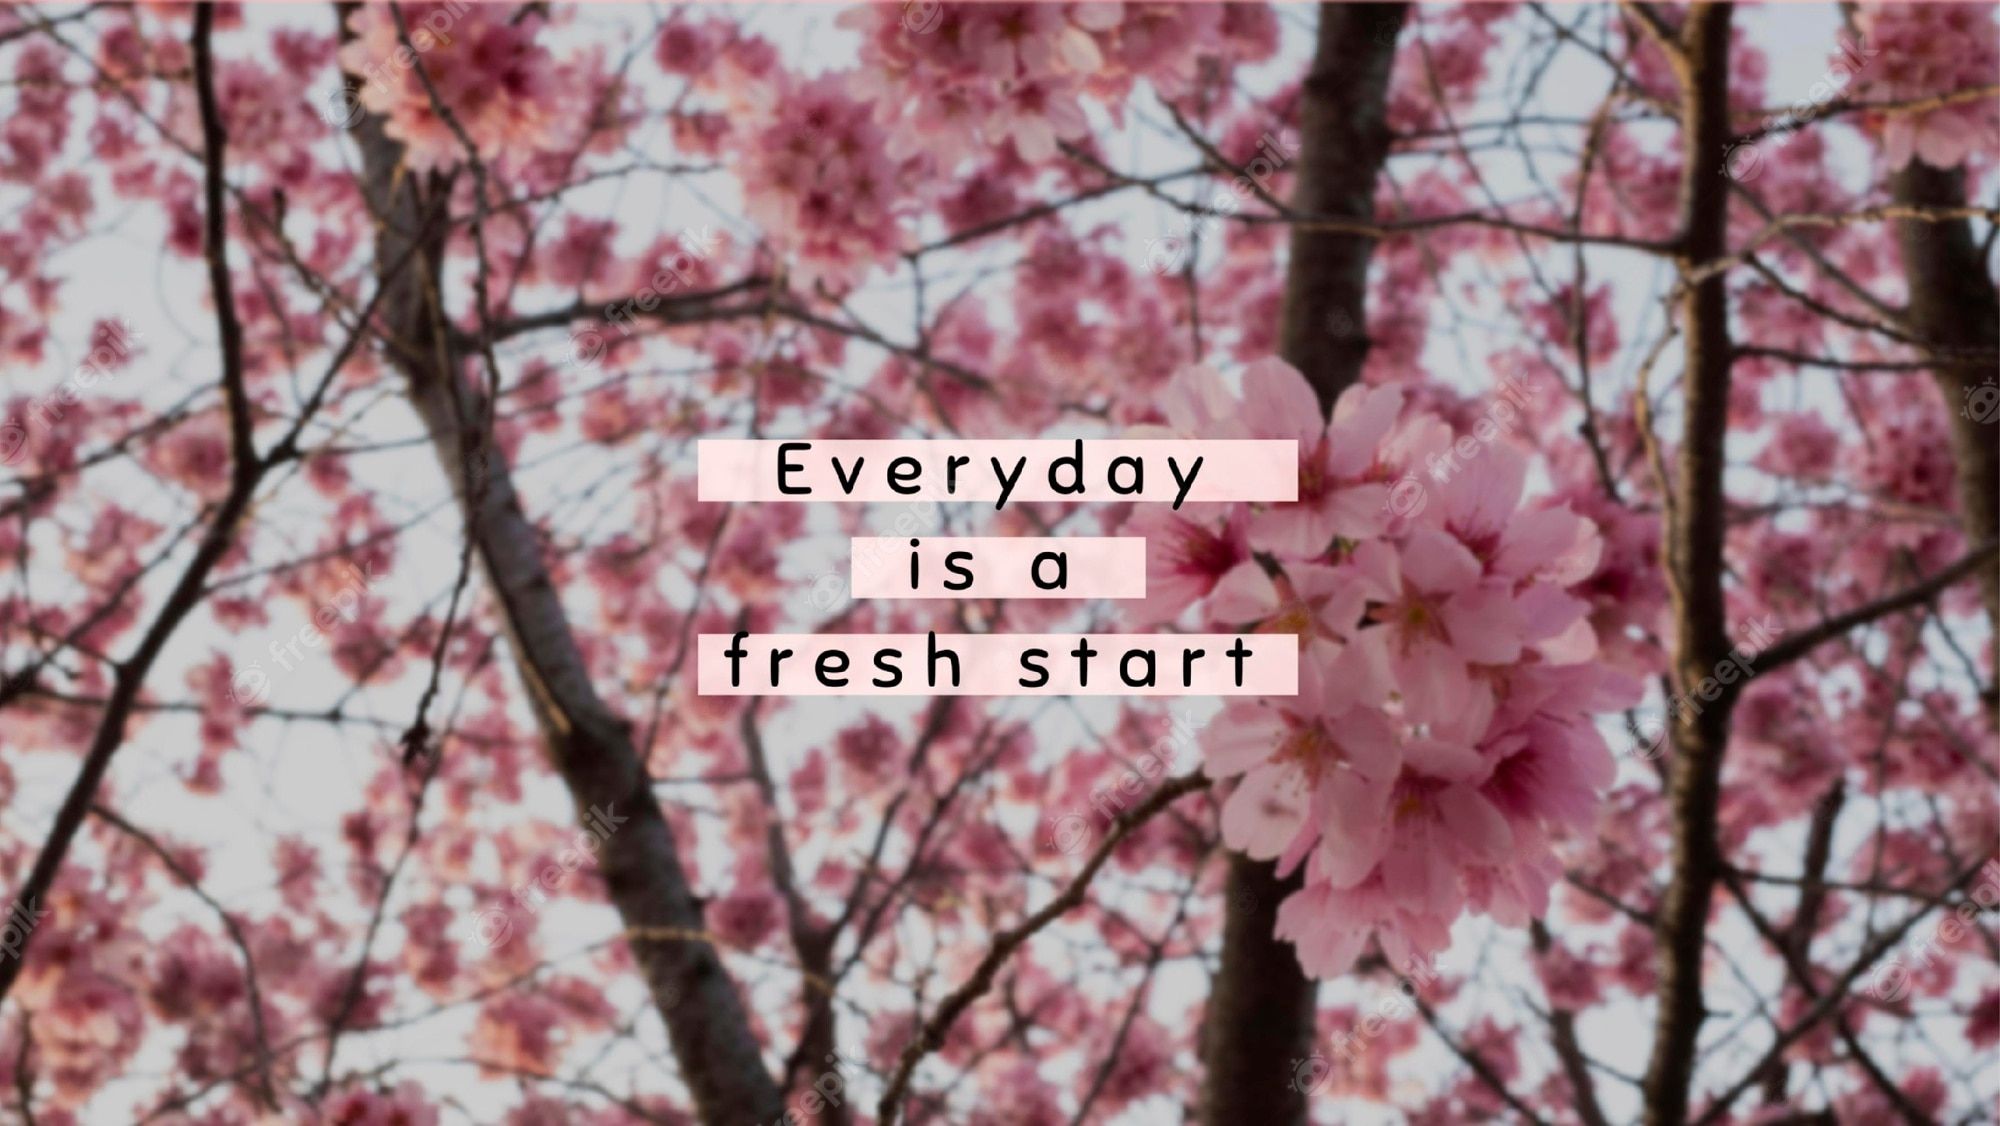 Every day is a fresh start. - Vintage fall